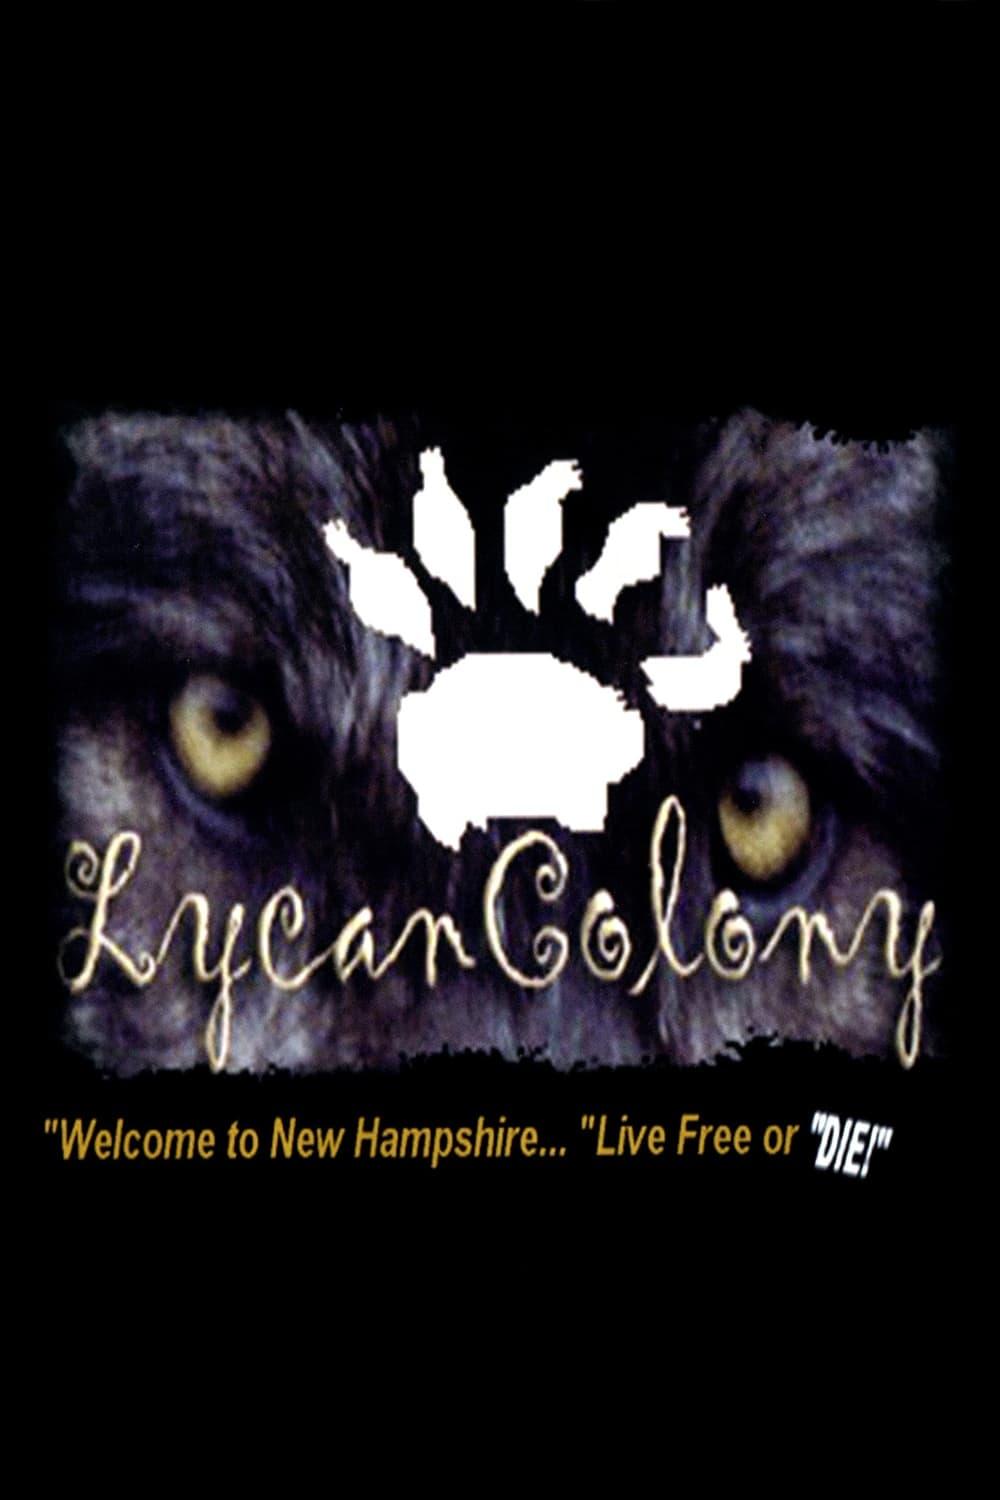 Lycan Colony poster